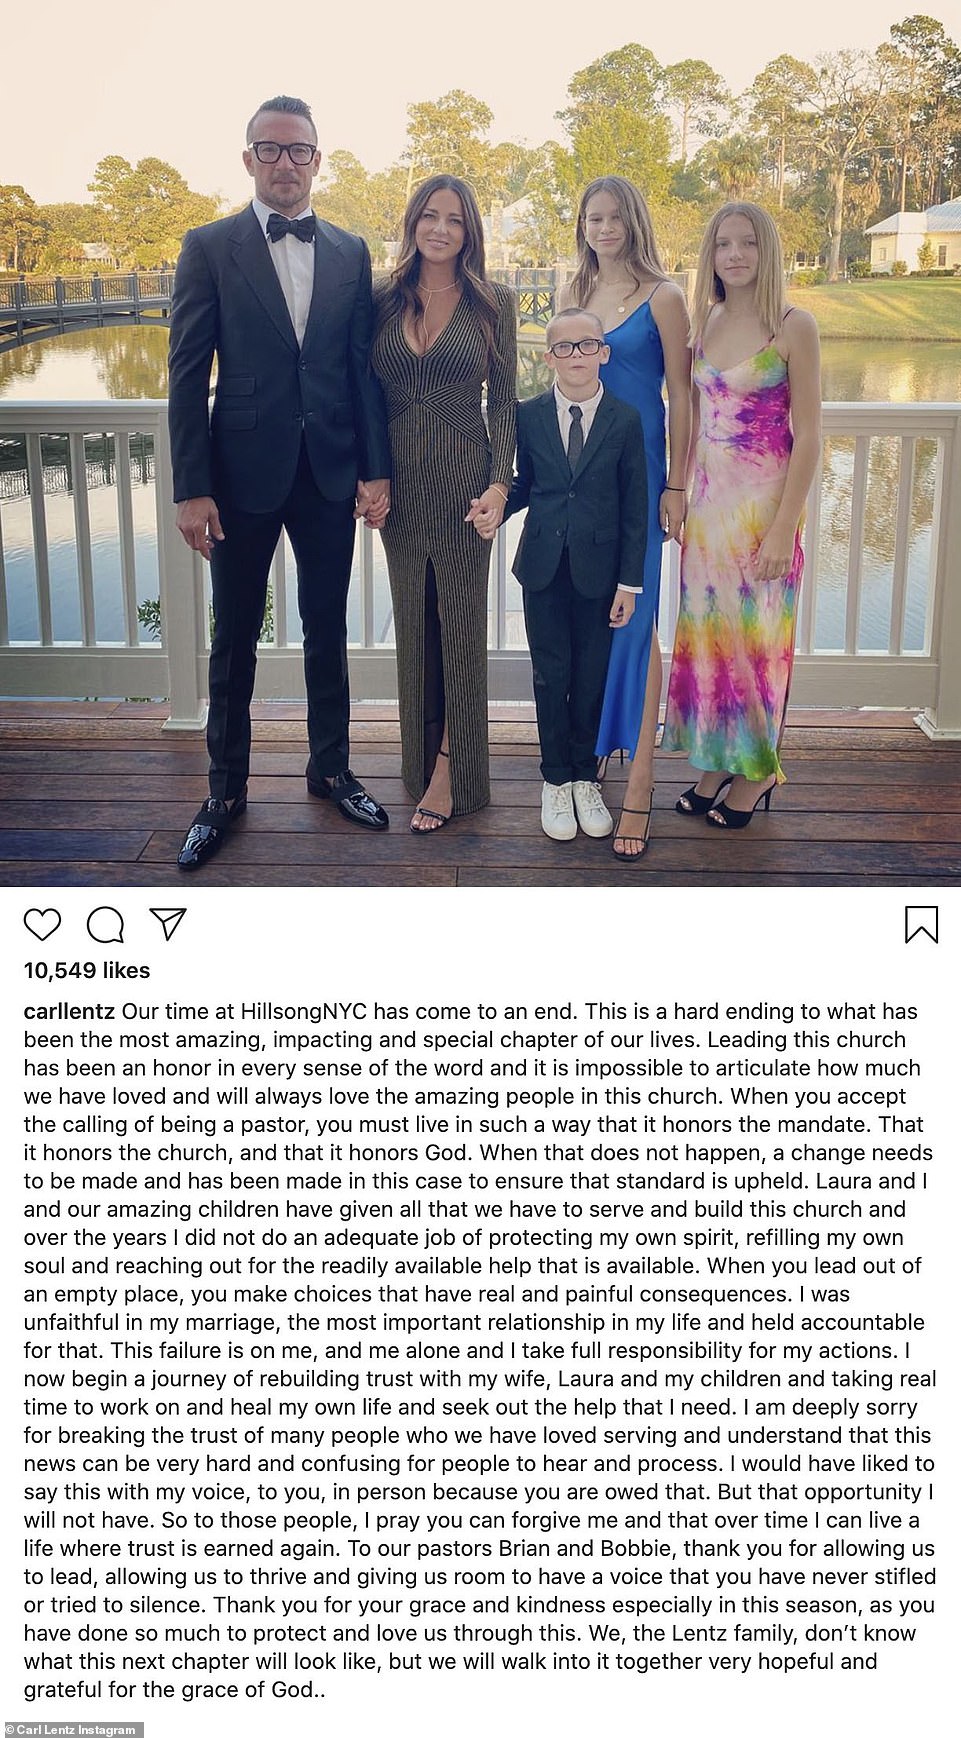 Lentz's Instagram post where he confessed to cheating on his wife of 17 years Laura